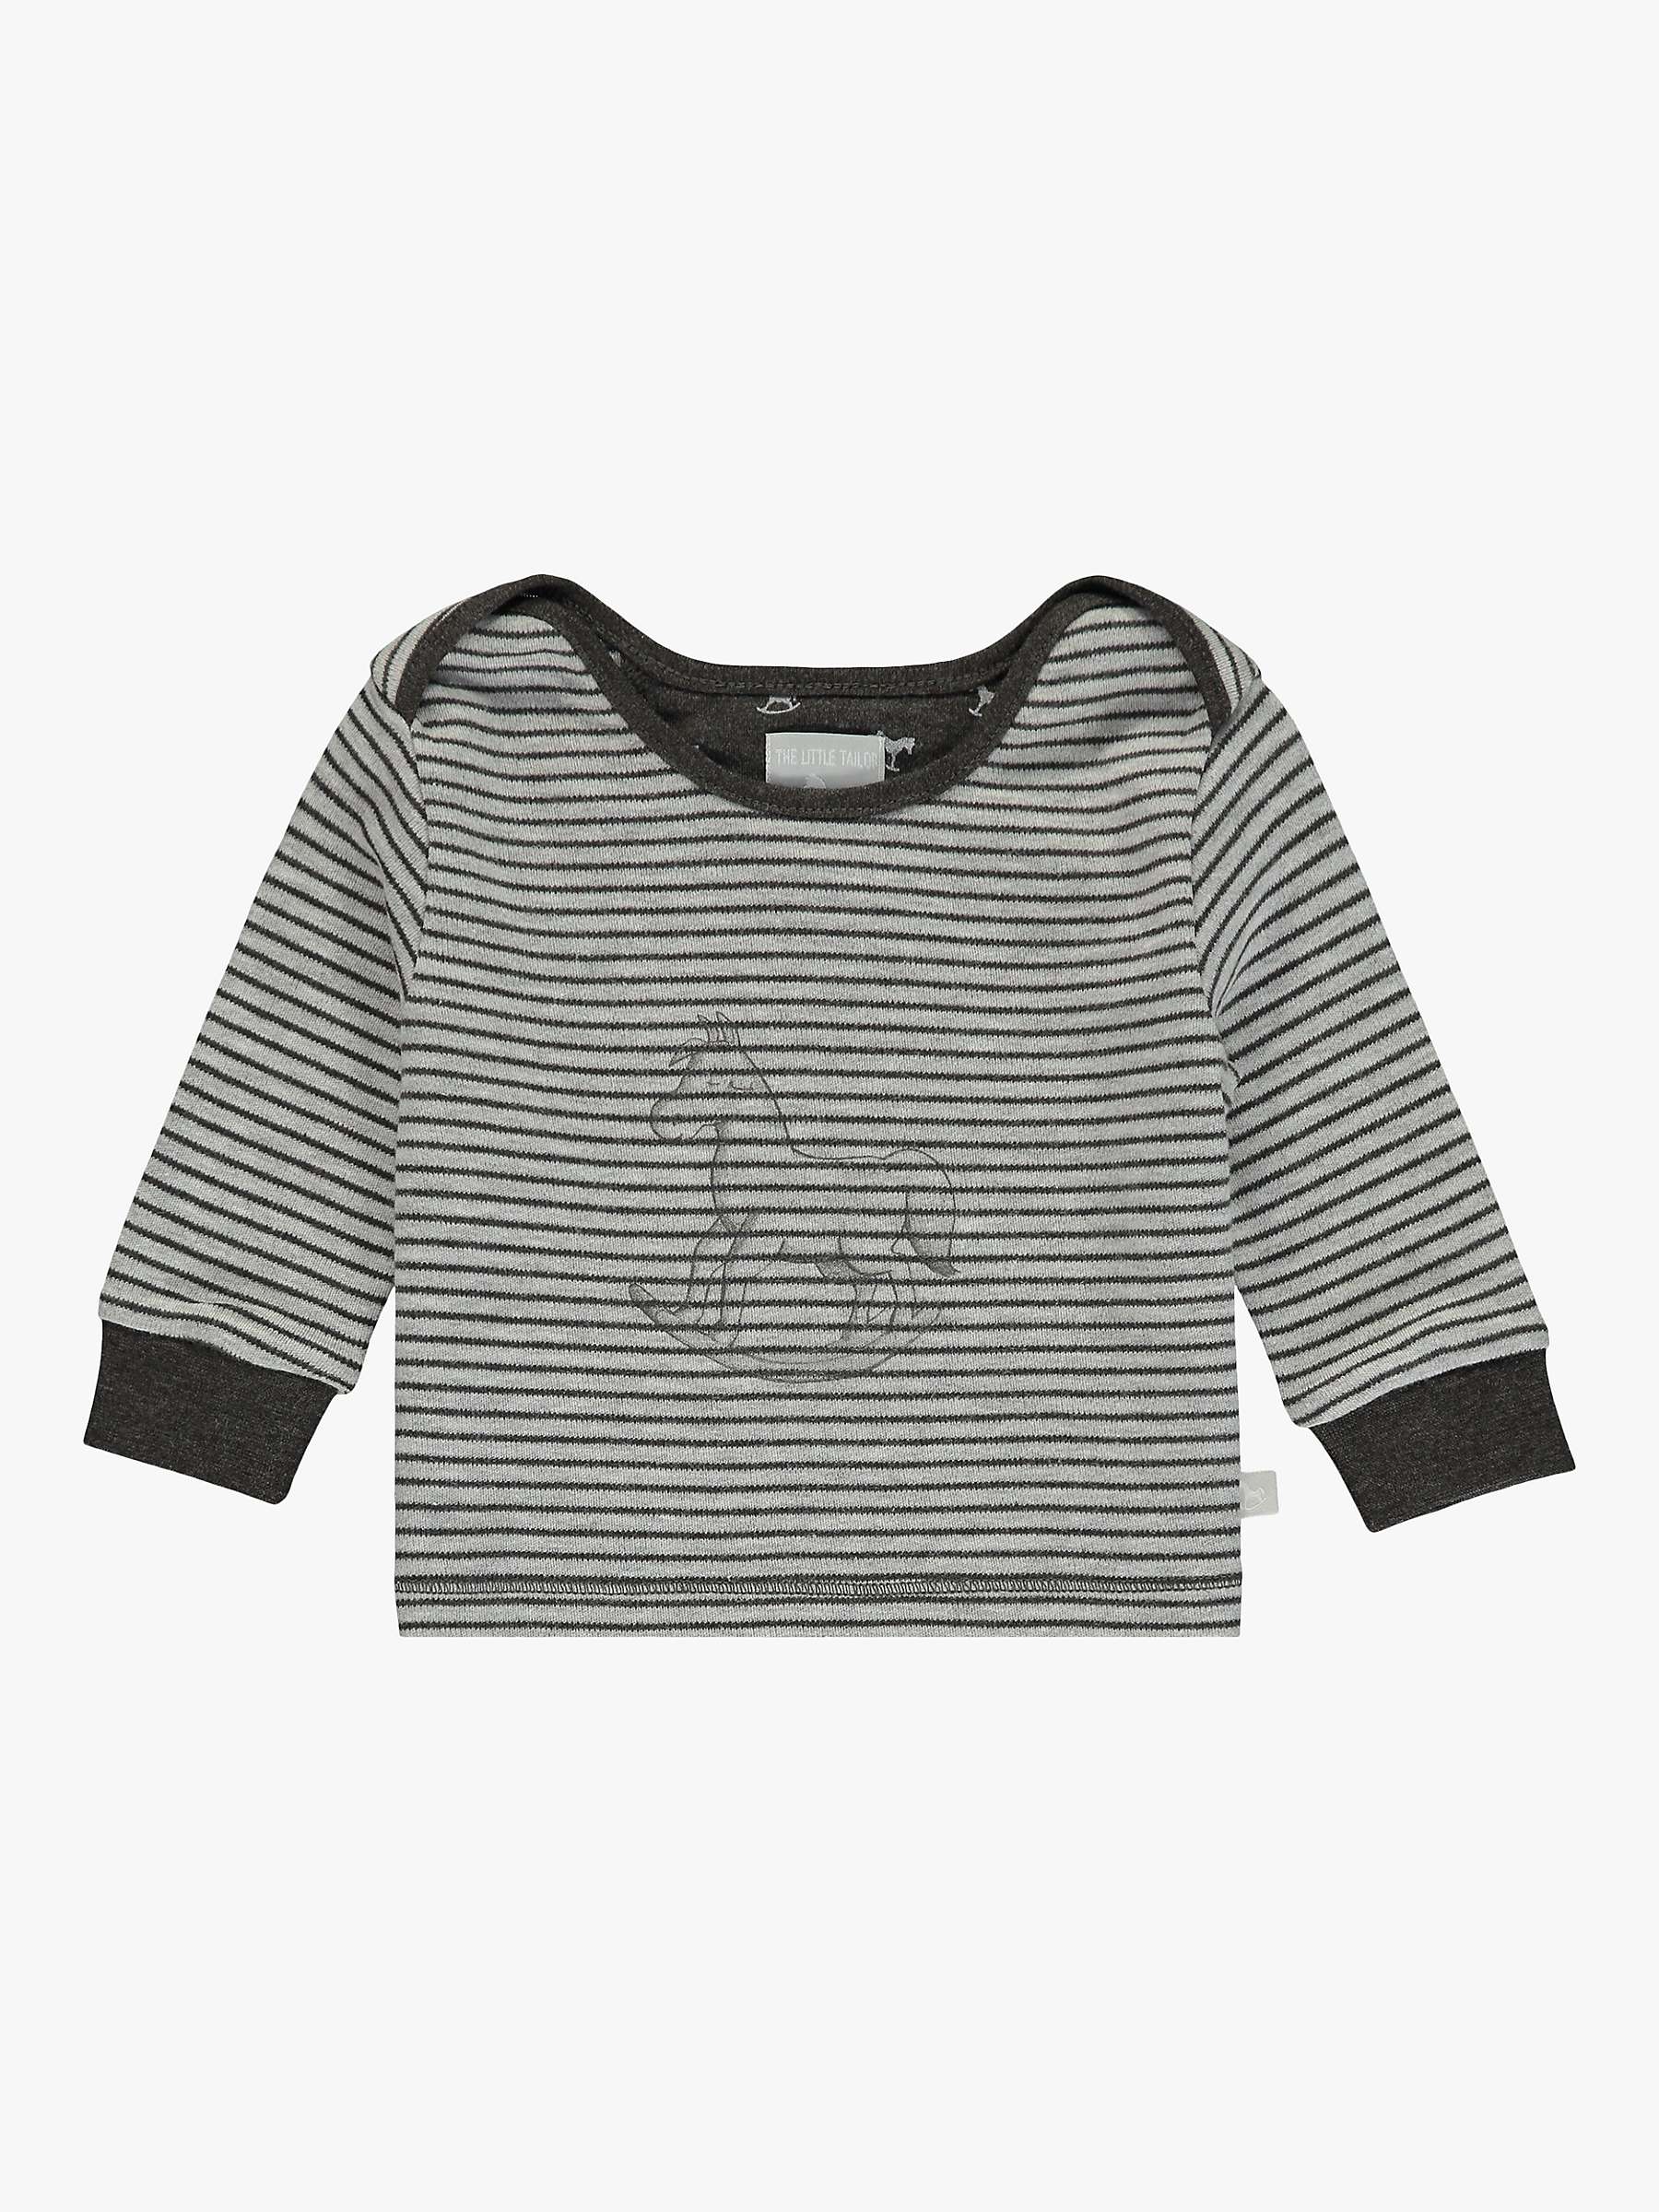 Buy The Little Tailor Baby Striped Rocking Horse Top Online at johnlewis.com